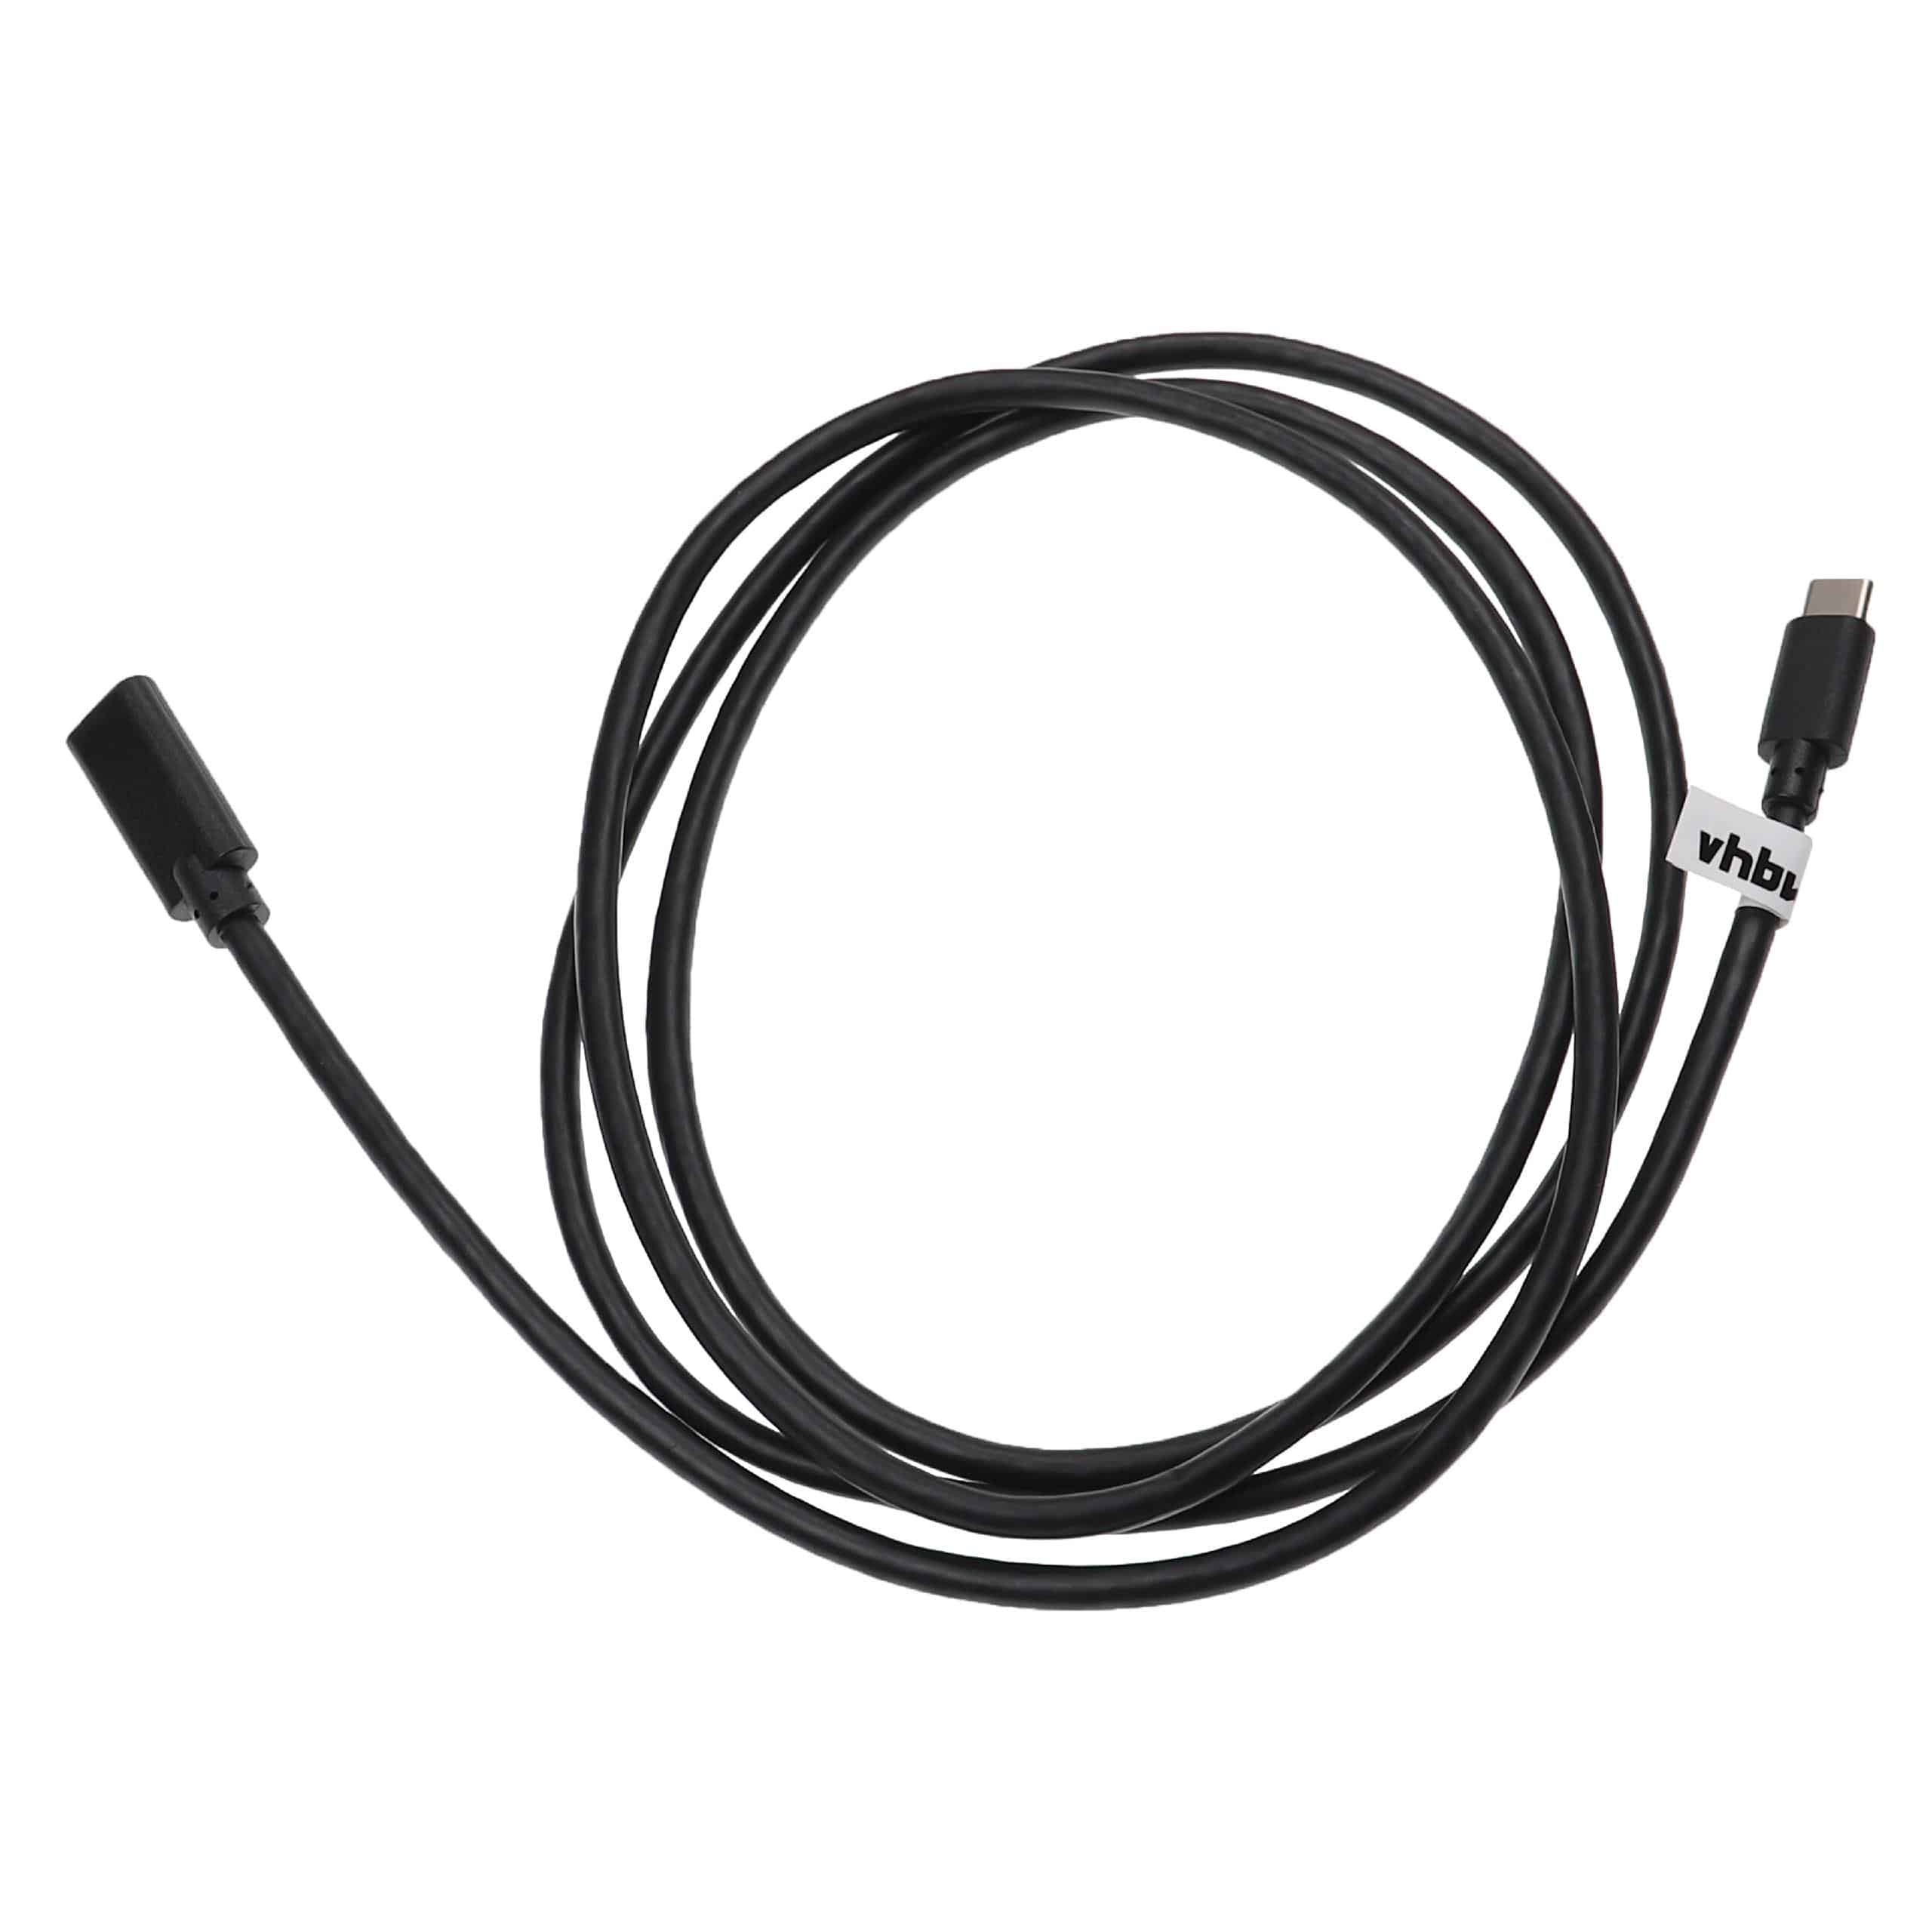 USB C Extension Cable for various Tablets, Notebooks, Smartphones, PCs - 1.5 m Black, USB 3.1 C Cable